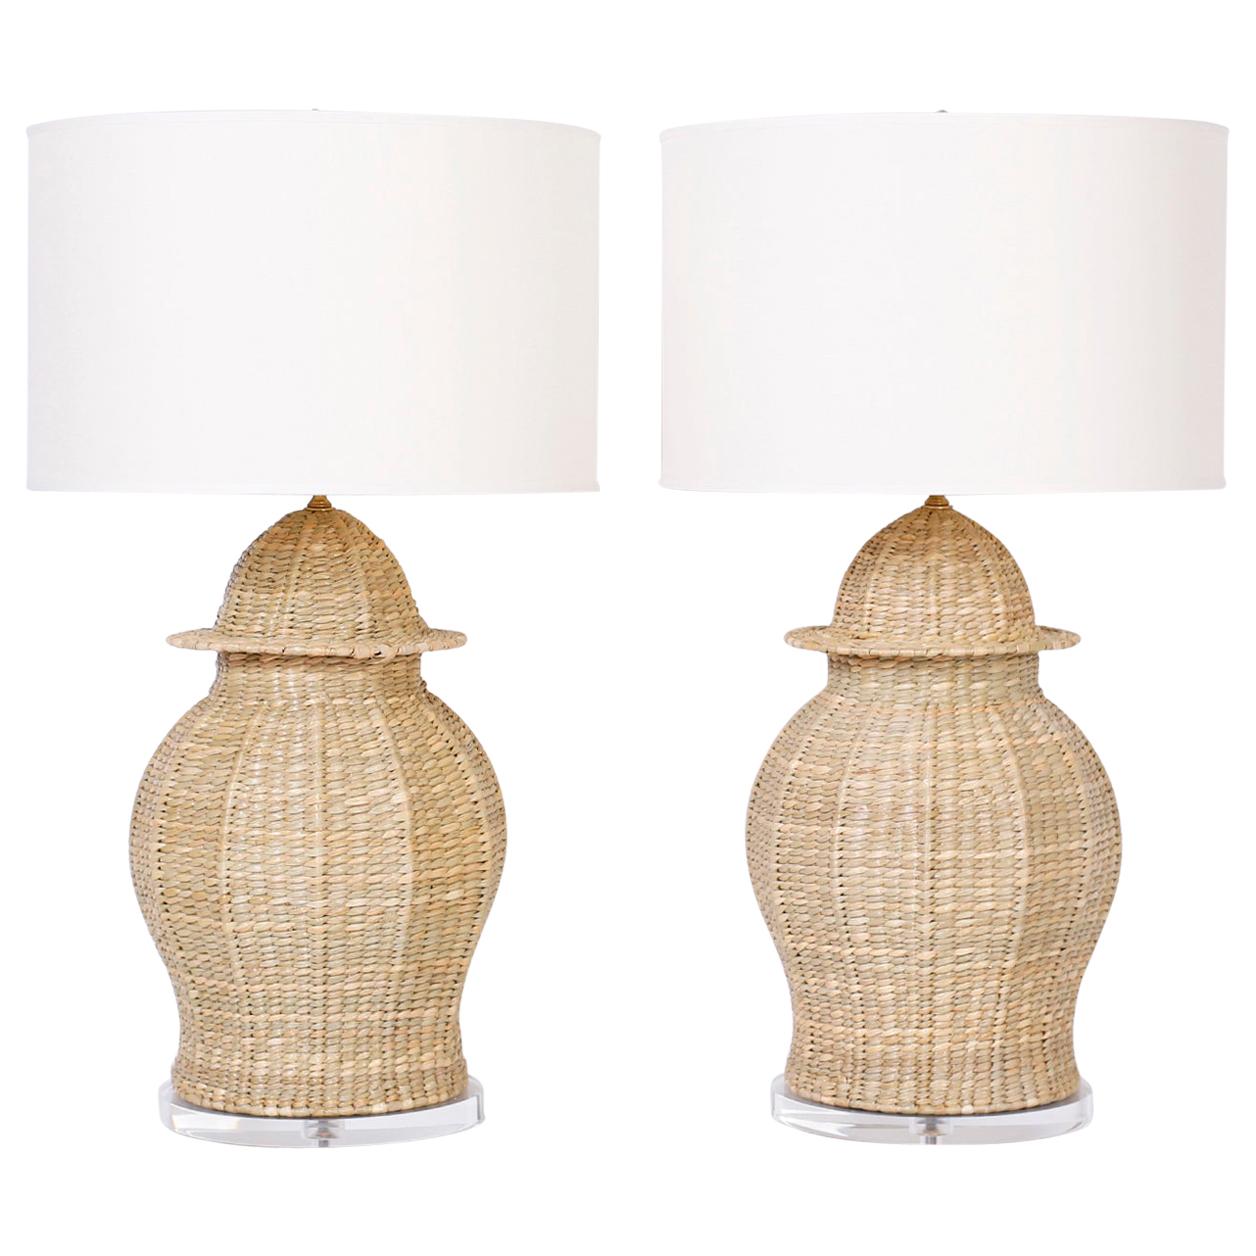 Pair of Wicker Table Lamps with a Chinese Ginger Jar Form